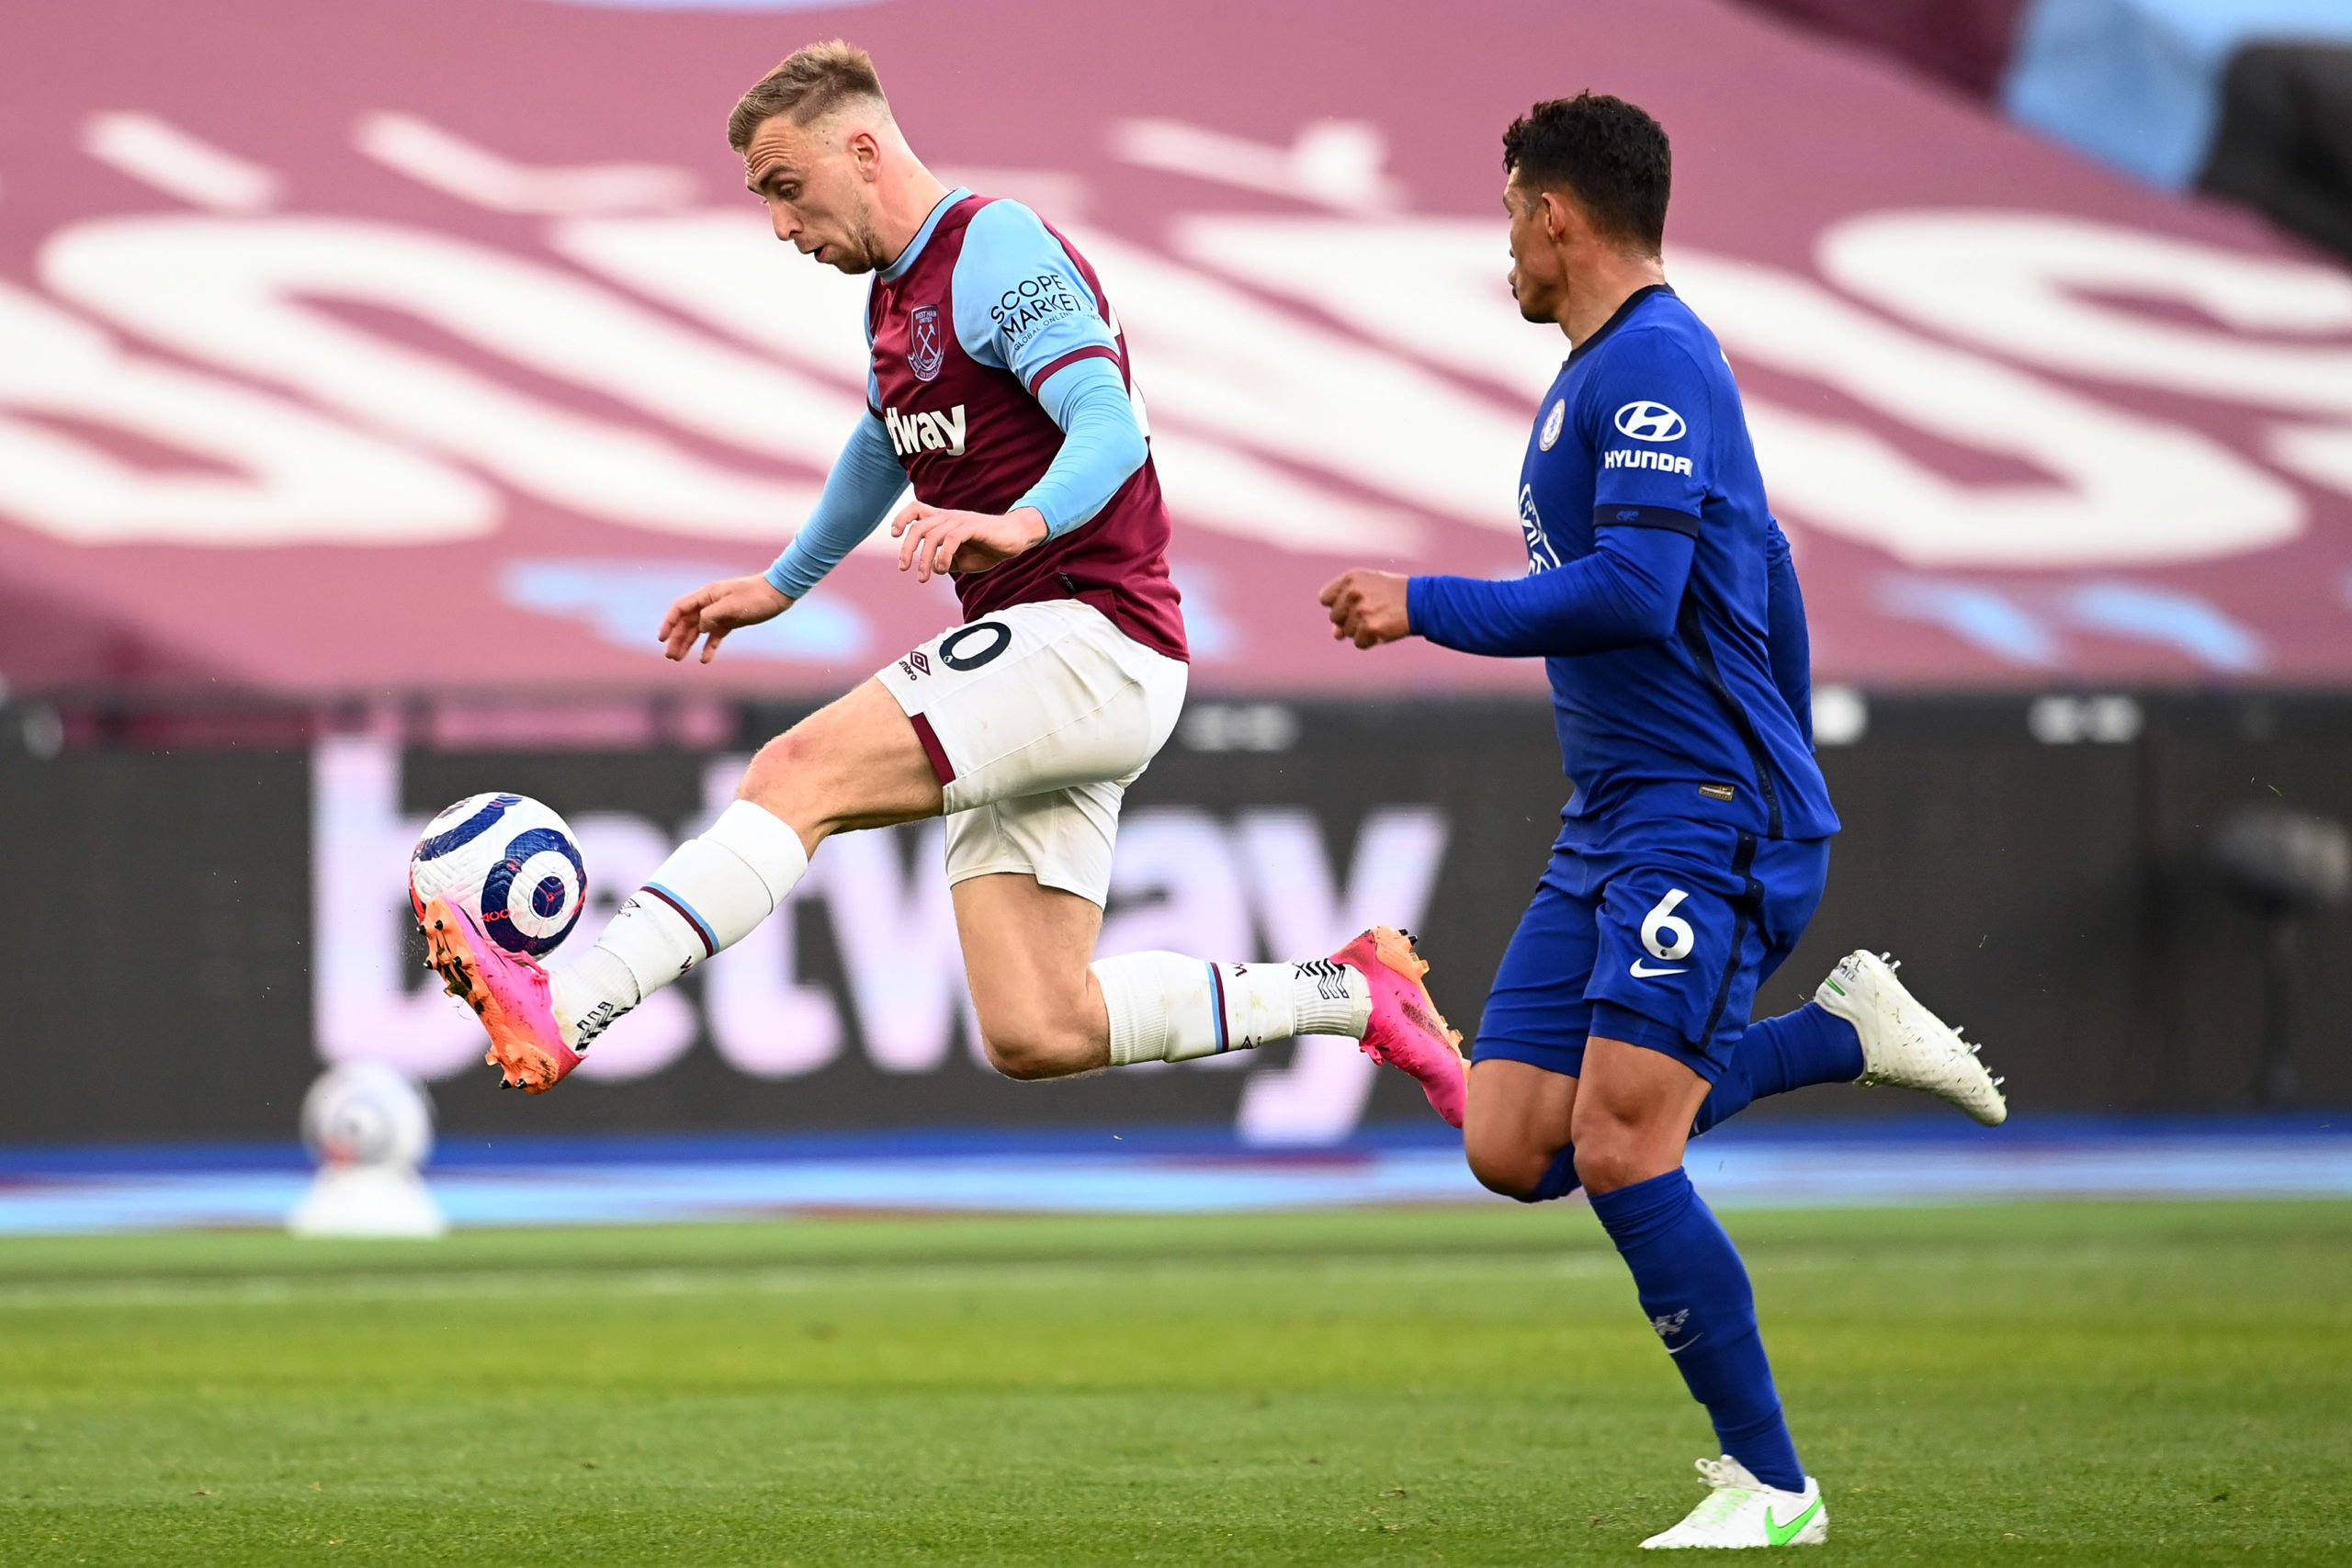 LONDON, ENGLAND - APRIL 24: Jarrod Bowen of West Ham United and Thiago Silva of Chelsea  battle for the ball  during the Premier League match between West Ham United and Chelsea at London Stadium on April 24, 2021 in London, England. Sporting stadiums around the UK remain under strict restrictions due to the Coronavirus Pandemic as Government social distancing laws prohibit fans inside venues resulting in games being played behind closed doors. (Photo by Andy Rain - Pool/Getty Images)The 4th Official uses images provided by the following image agency: Getty Images (https://www.gettyimages.de/) Imago Images (https://www.imago-images.de/)